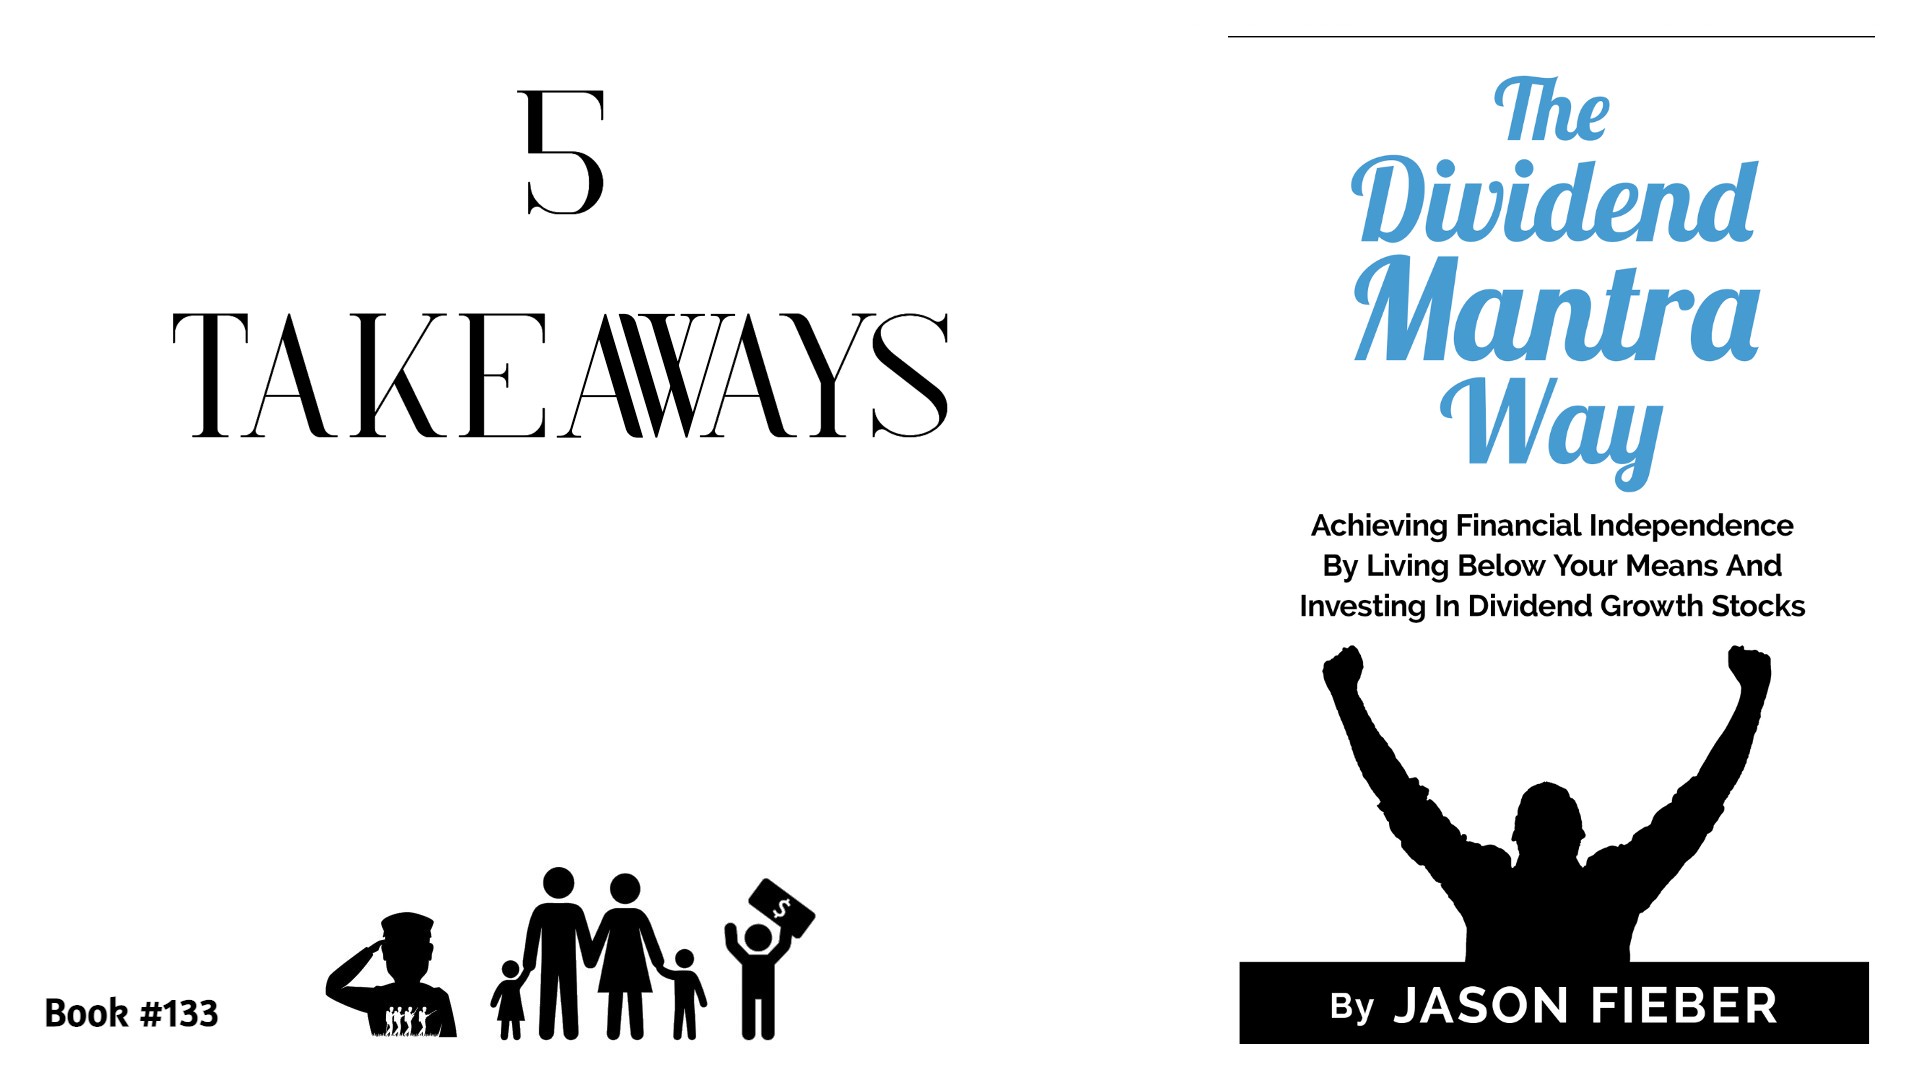 5 Takeaways from “The Dividend Mantra Way”